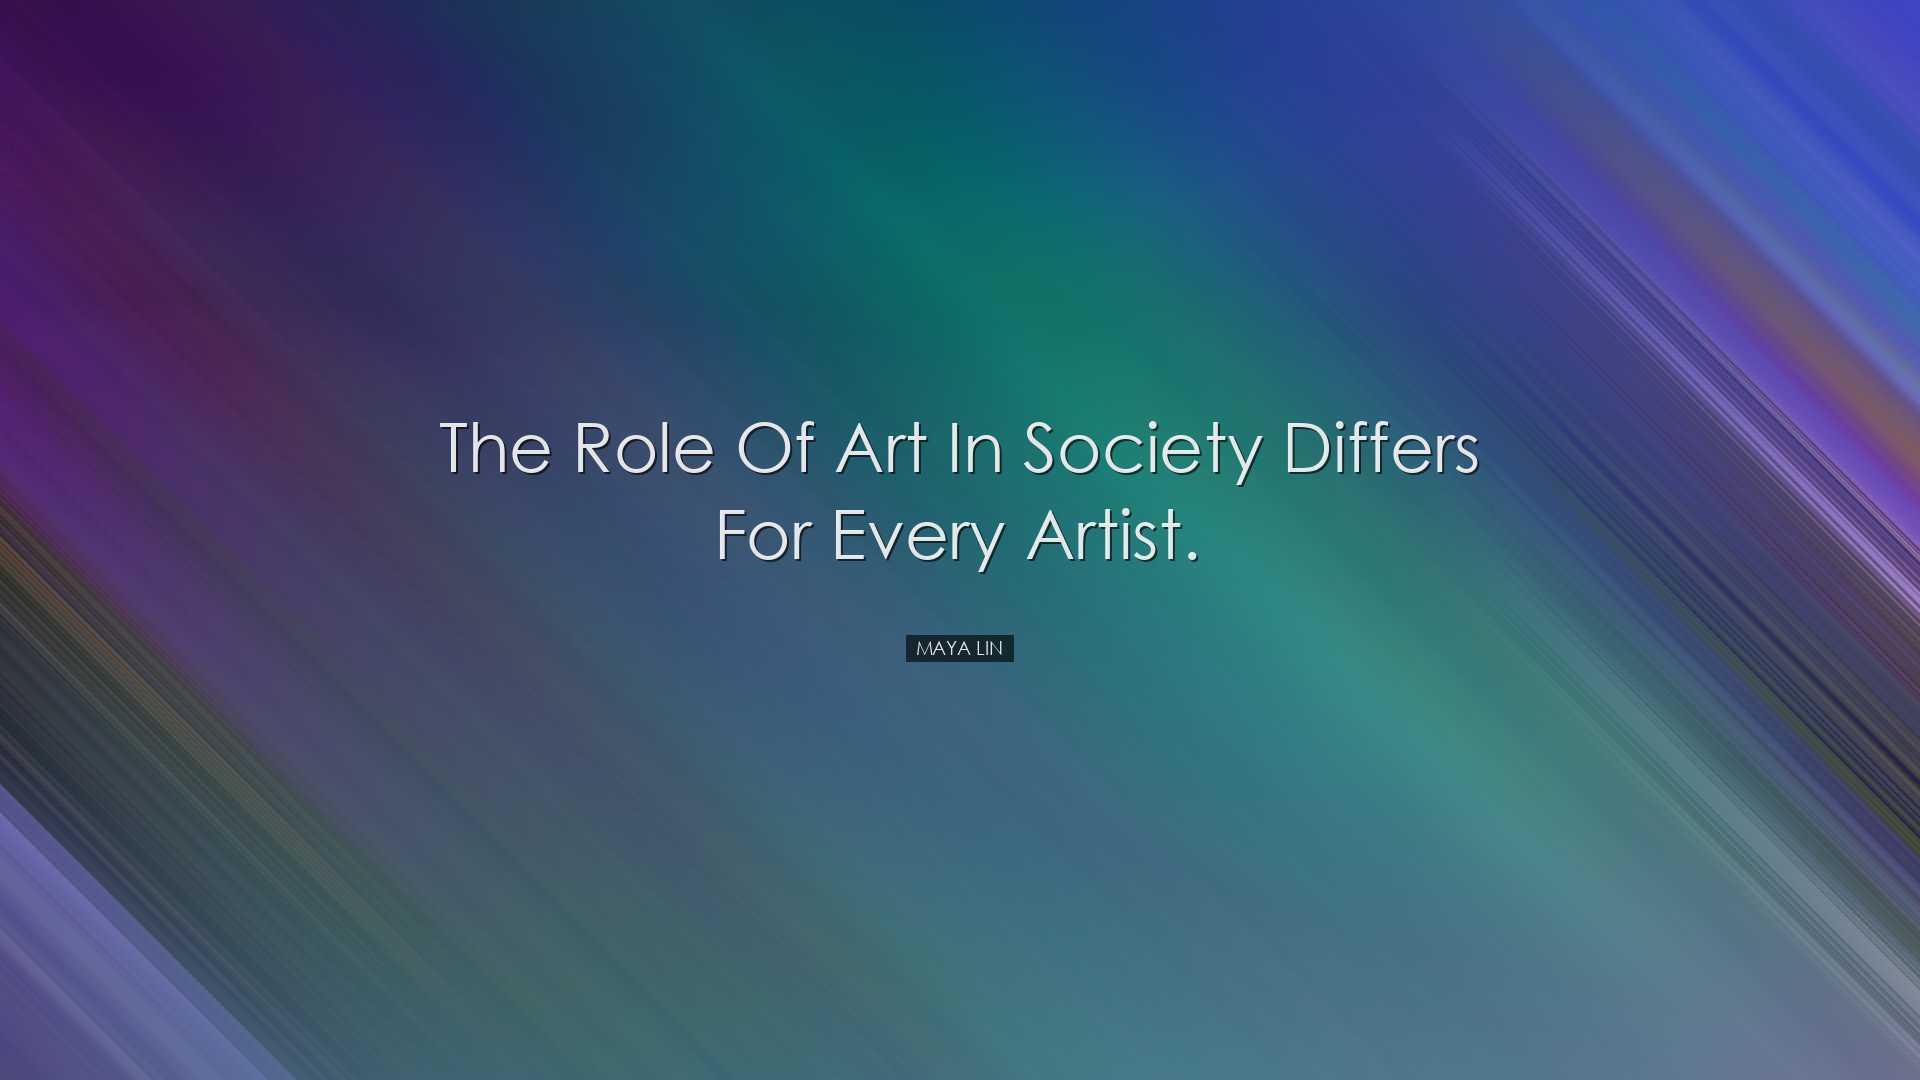 The role of art in society differs for every artist. - Maya Lin